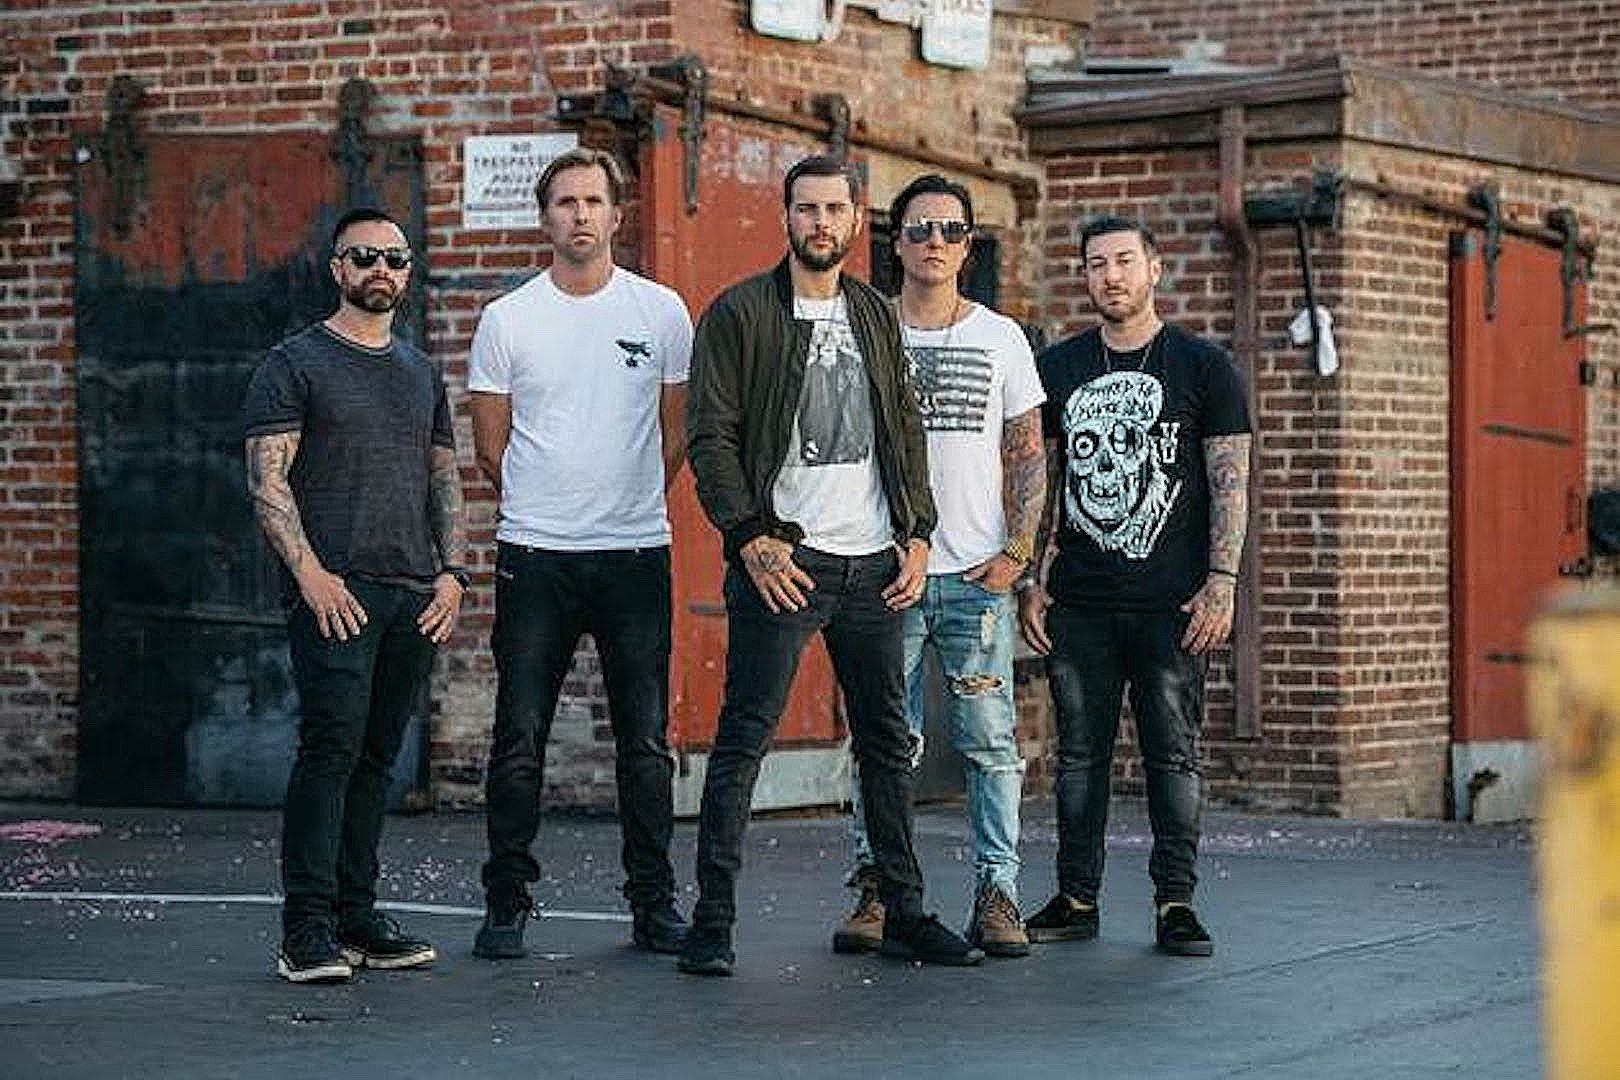 Avenged Sevenfold Release New Single - All Things Loud